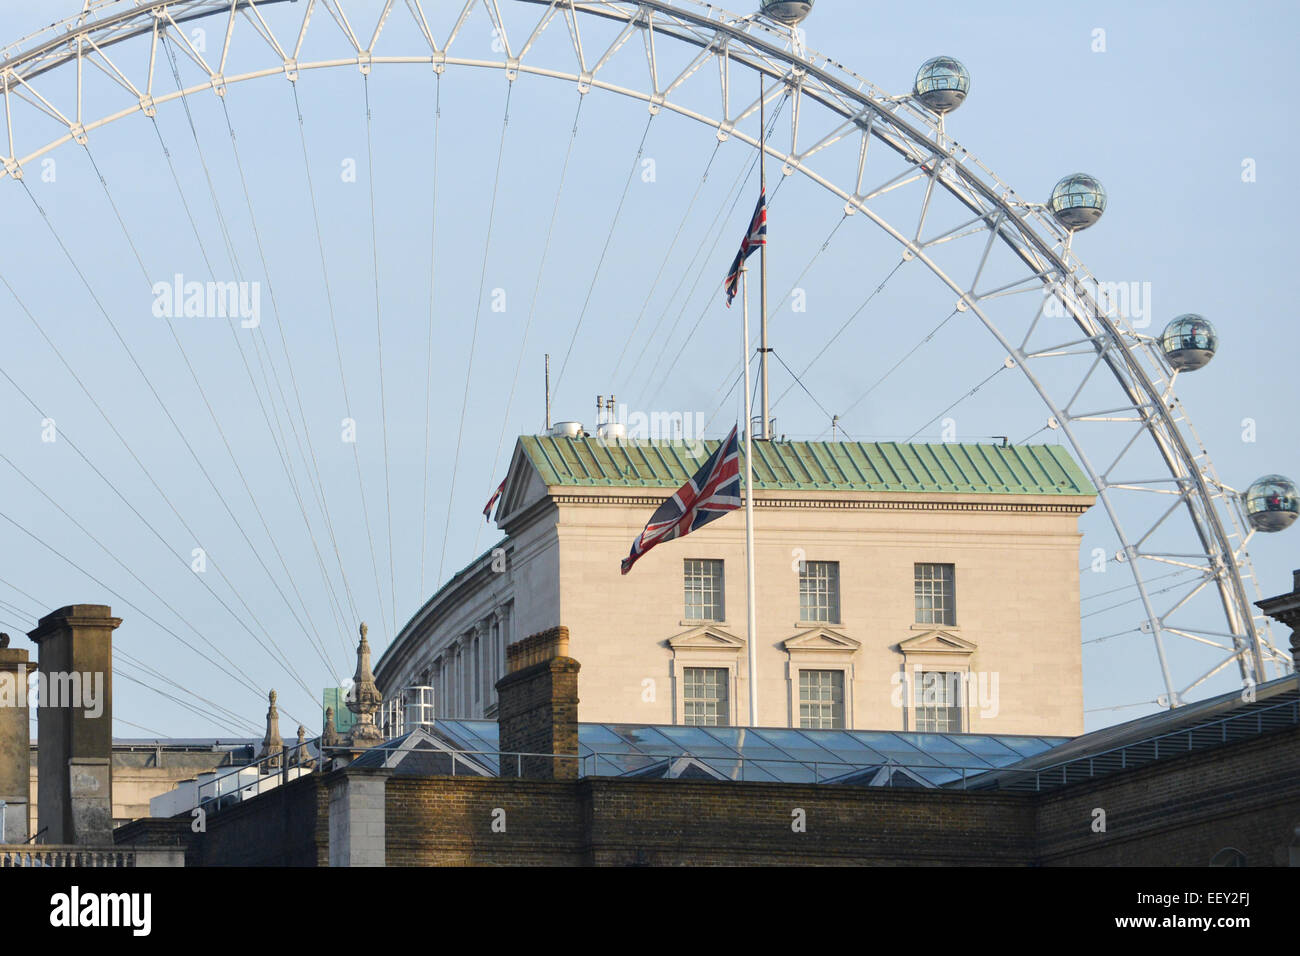 Whitehall, London, UK. 23rd January 2015. All the flags around Westminster and Whitehall are flying at half mast on the death of the Saudi King Abdullah bin Abdulaziz. Credit:  Matthew Chattle/Alamy Live News Stock Photo